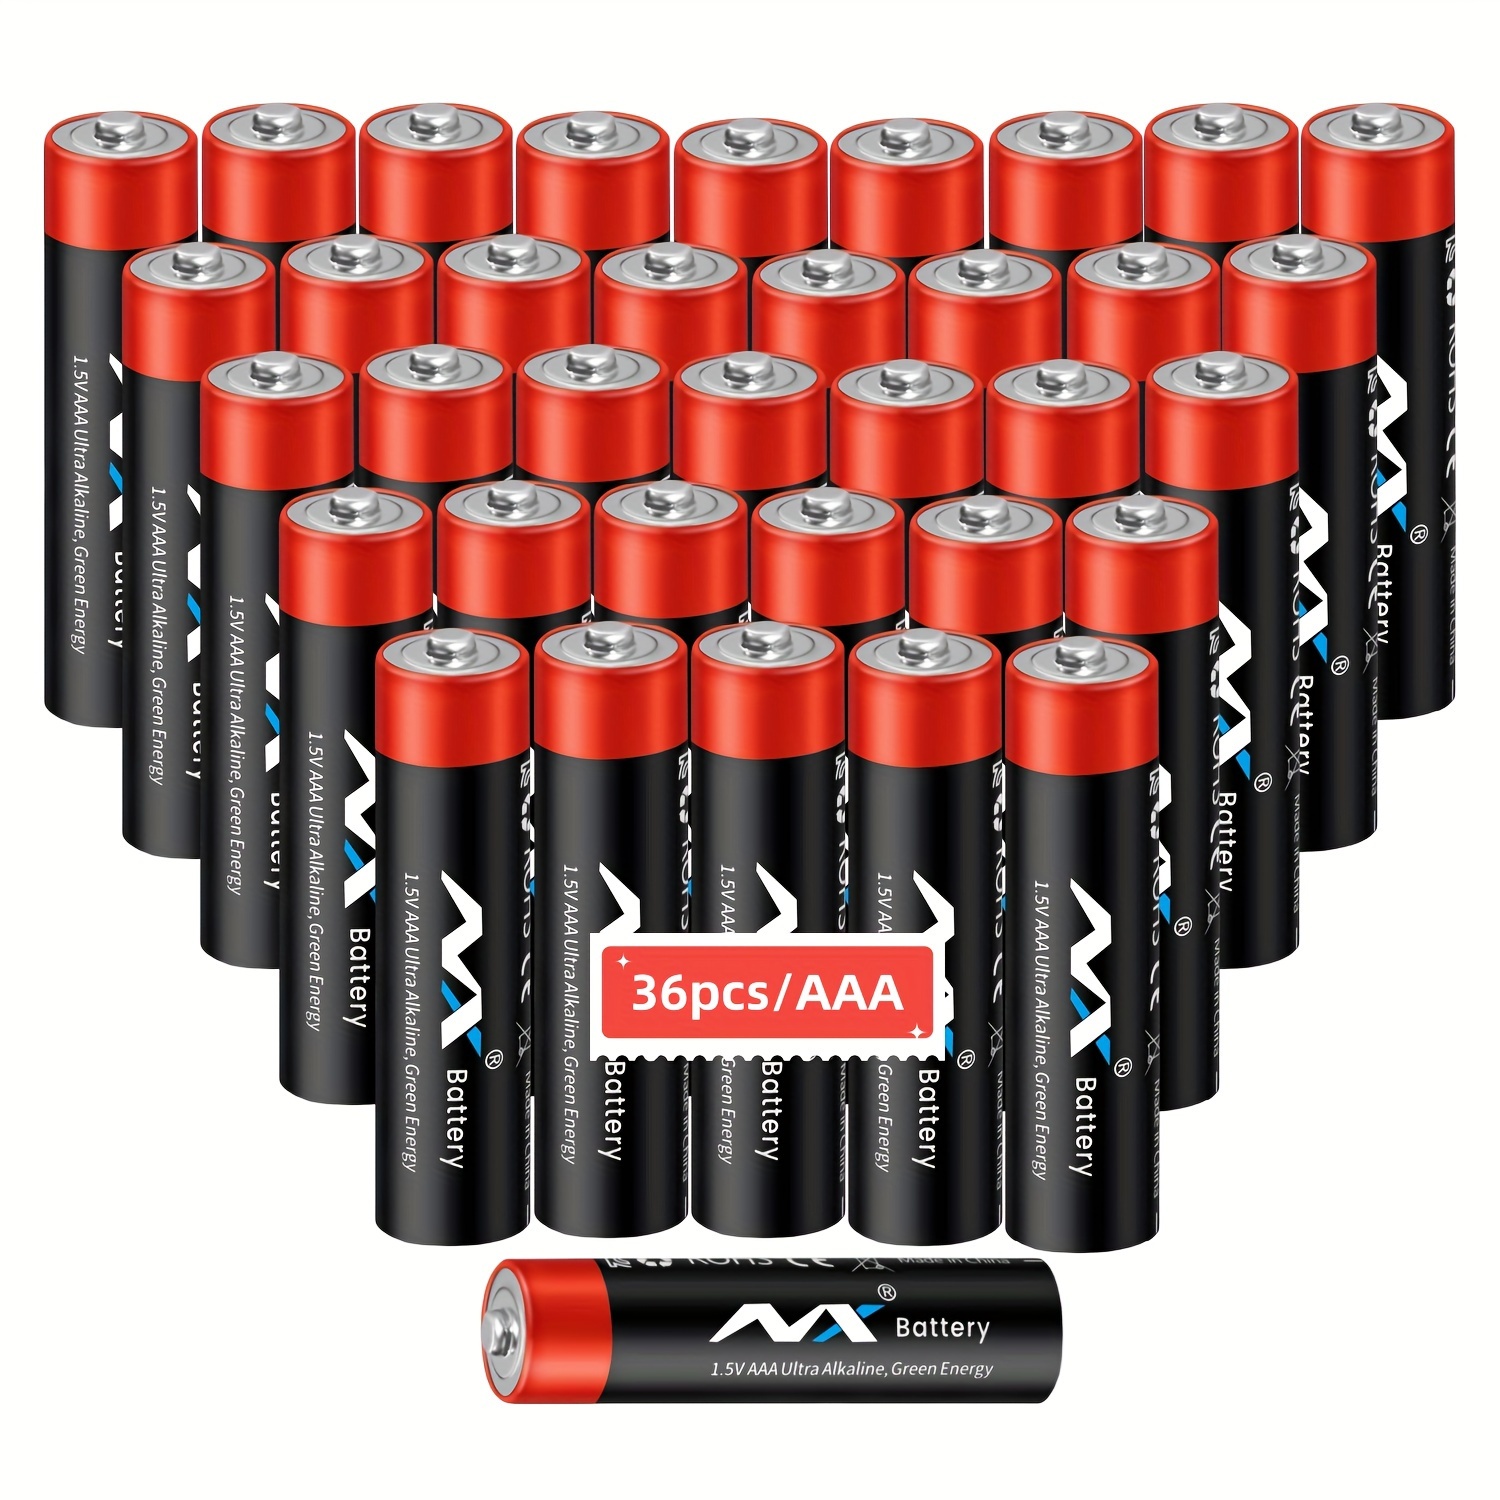 AA AAA LR6 LR03 1.5V toy battery 14500 alkaline rechargeable battery w/h  charger